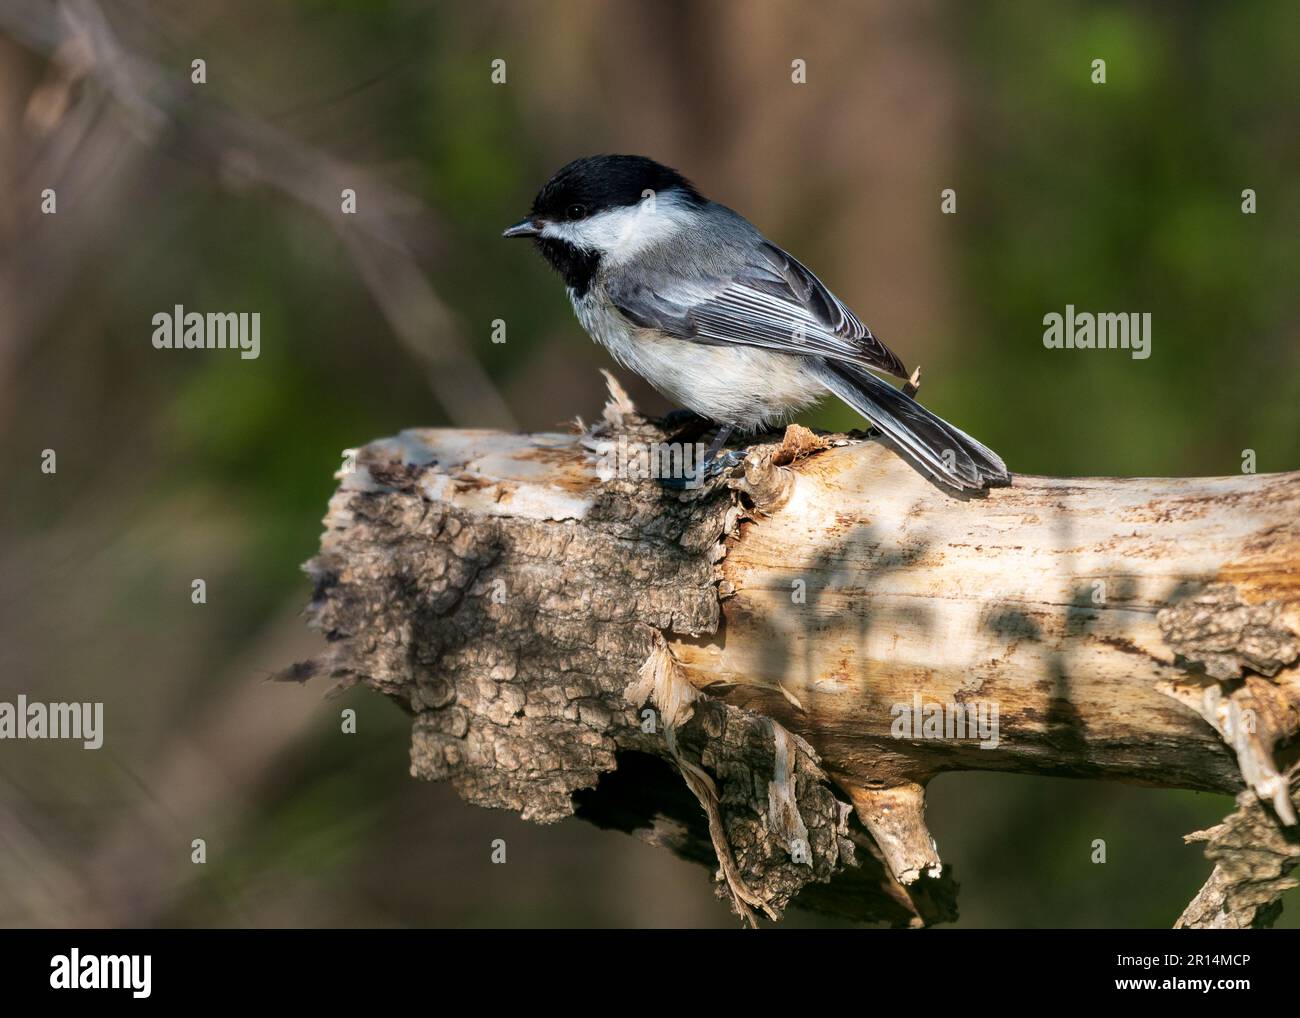 Cute Black-capped Chickadee Perched on Dead Branch Stock Photo